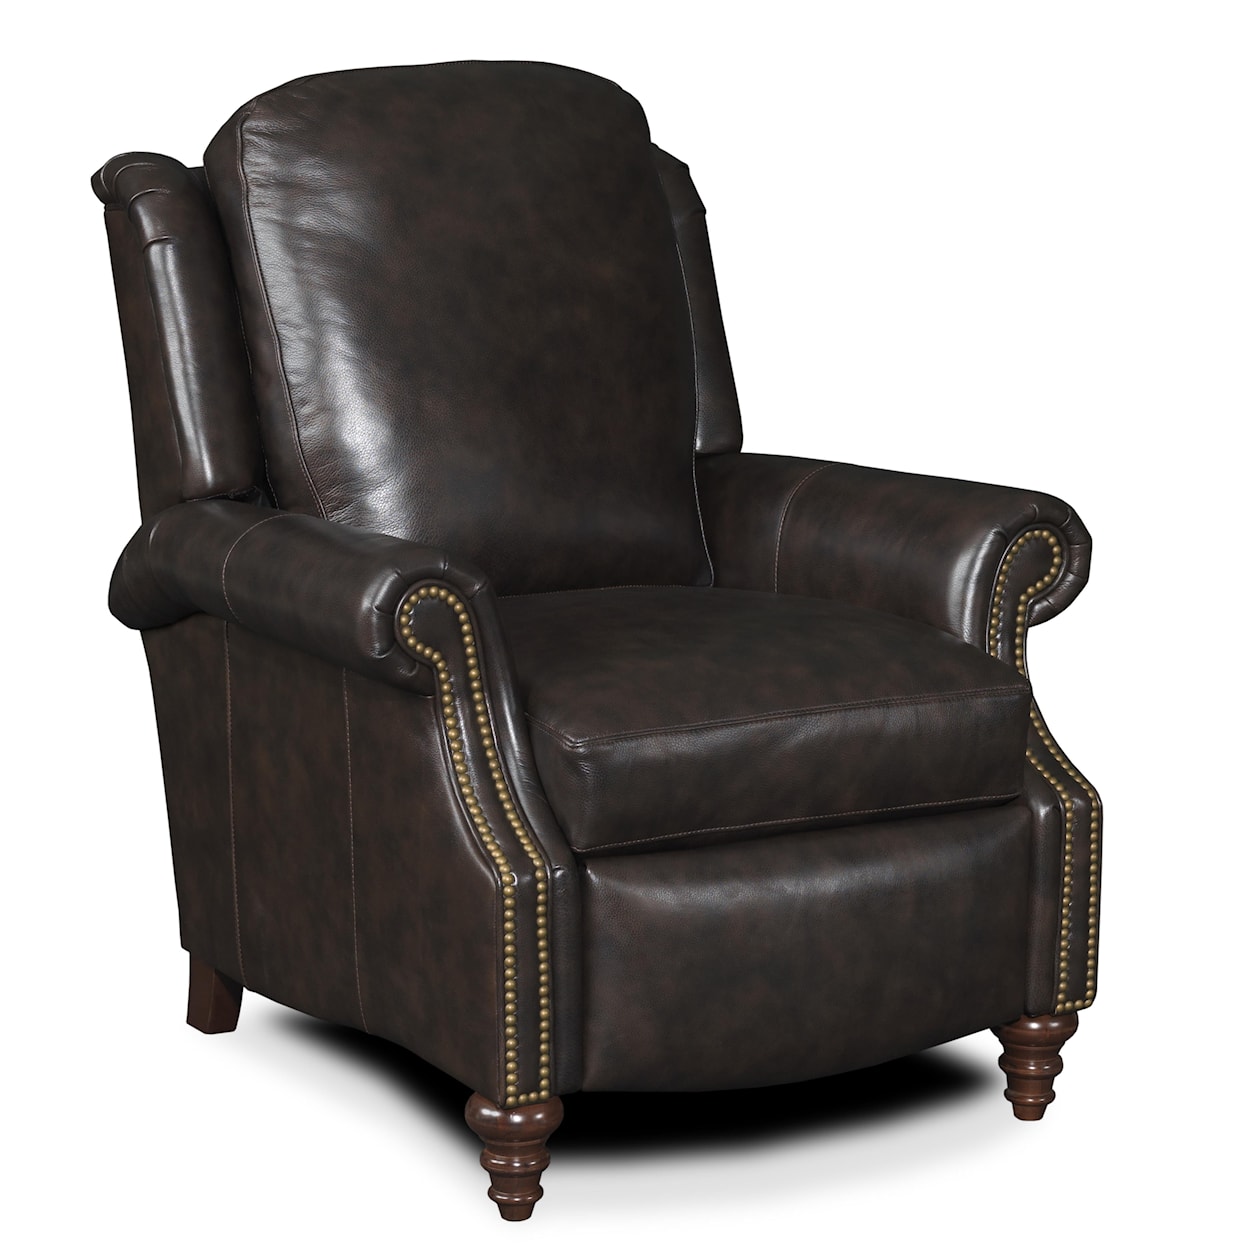 Bradington Young Chairs That Recline Hobson Pushback Recliner